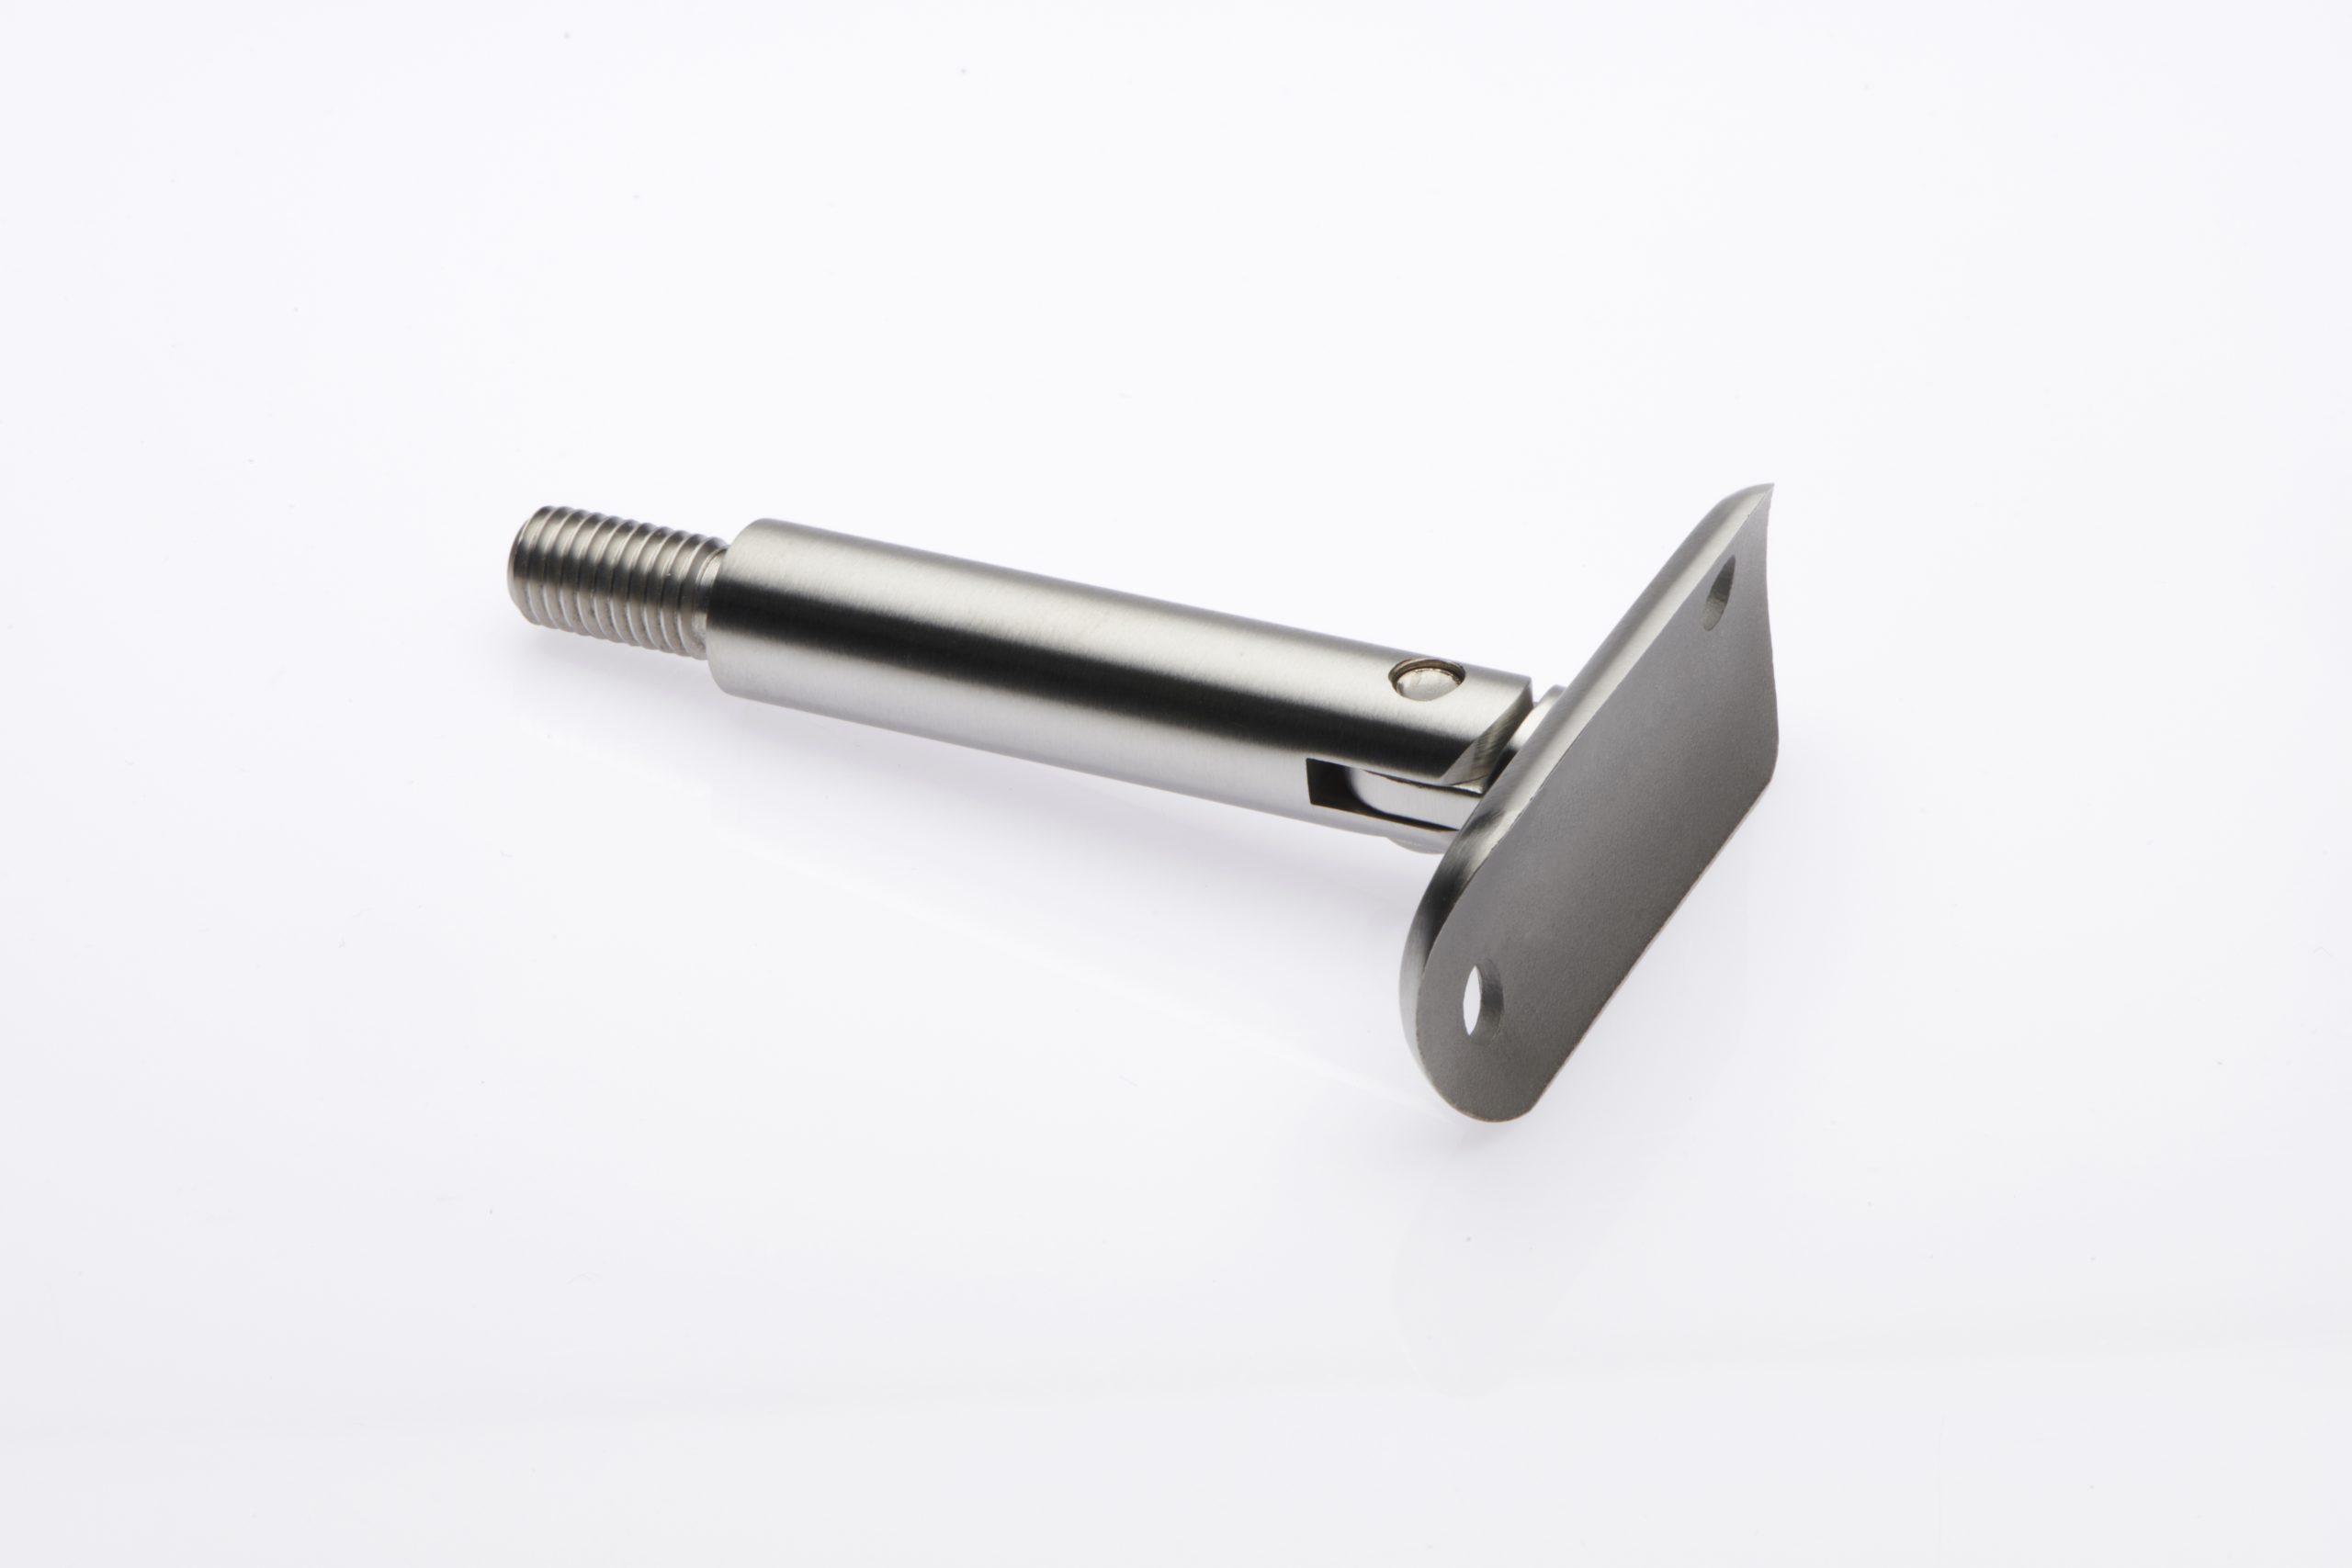 Handrail Stem With Thread With Adjustable Saddle For 48mm Tube Or Handrail